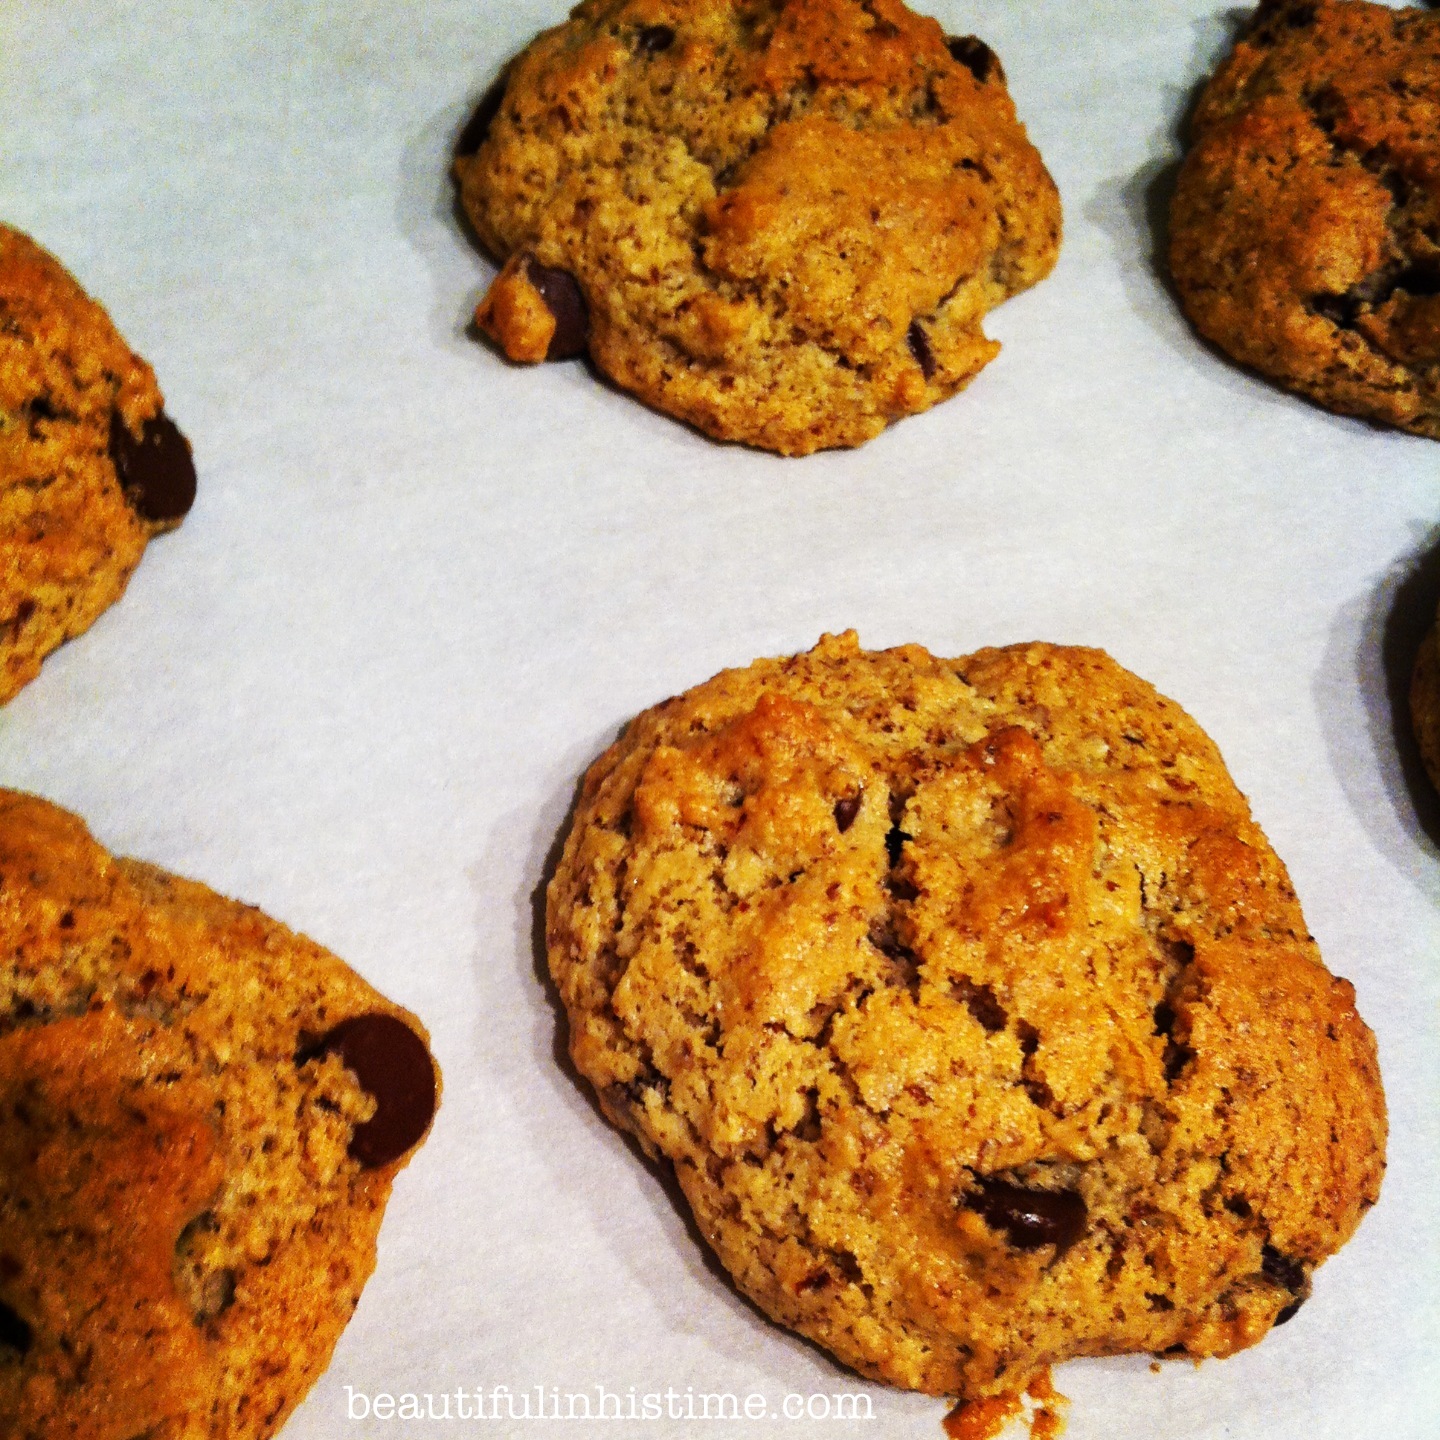 Paleo chocolate chip cookies Beauty in the Mess Edition 07.09.13 @beautifulinhistime.com